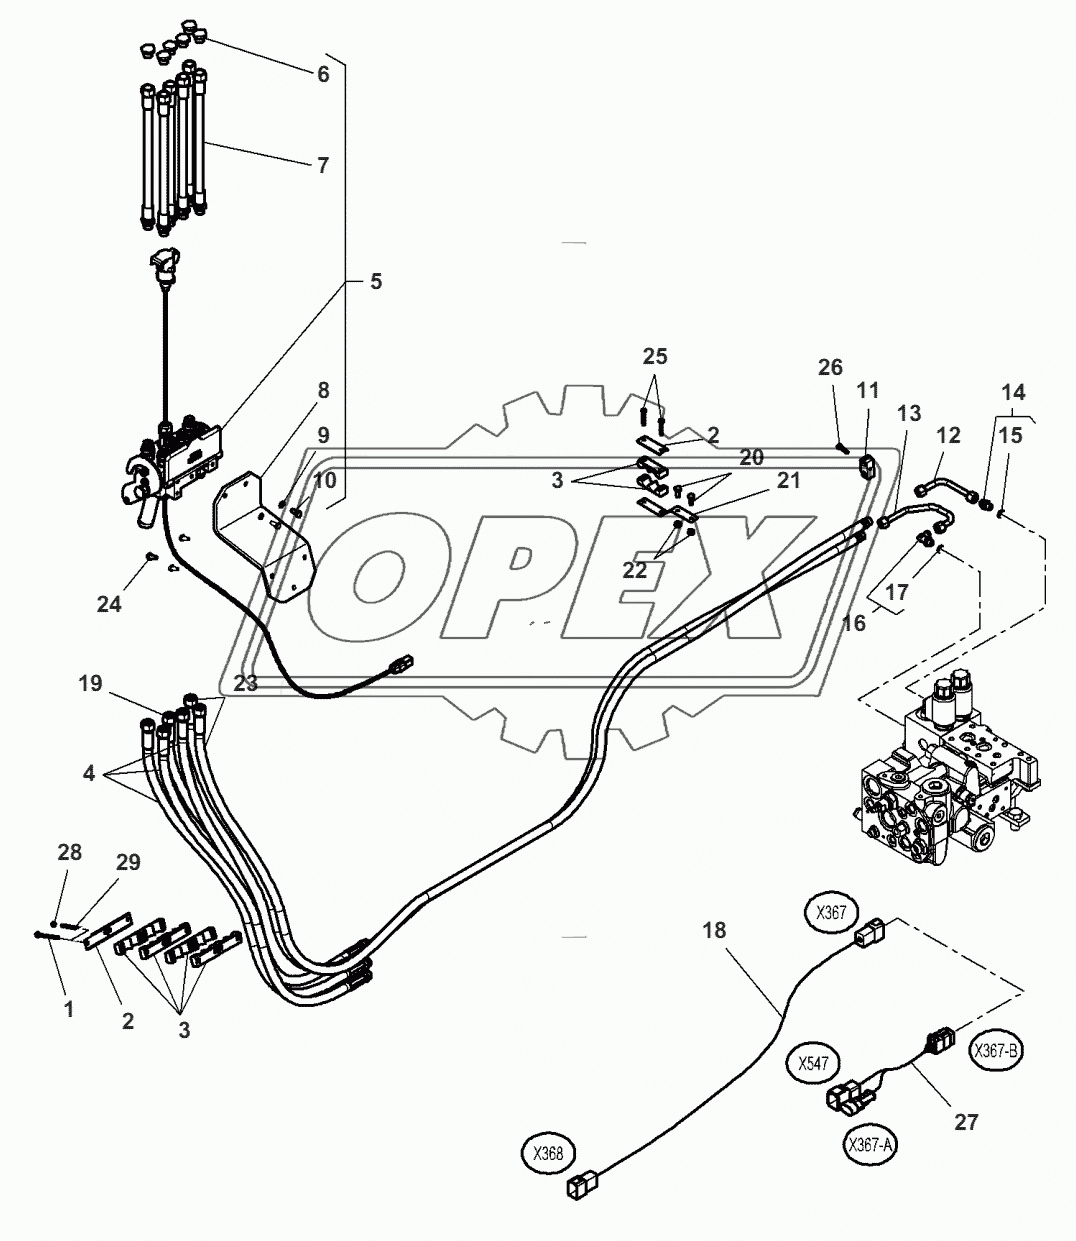 Loader - Hydraulic - From Serial or Engine Number - 21-NOV-2008